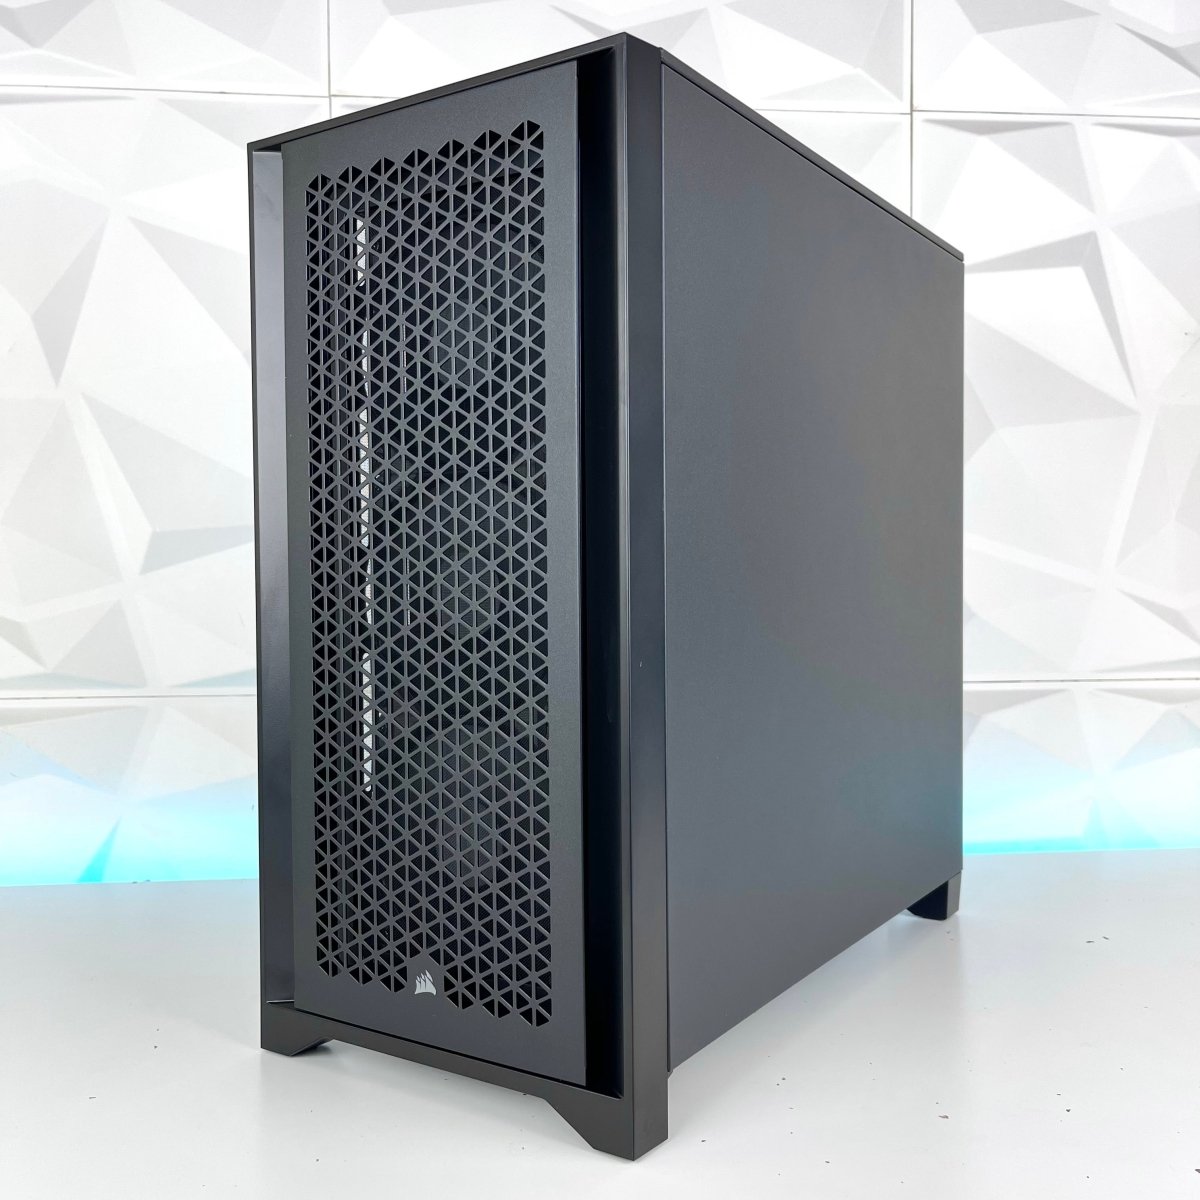 I Gaming Computer | Ryzen 7 7700X/7800x3D | RTX 4080/4090 | Black Assassin Pro - I Gaming Computer | Australia Wide Shipping | Buy now, Pay Later with Afterpay, Klarna, Zip, Latitude & Paypal